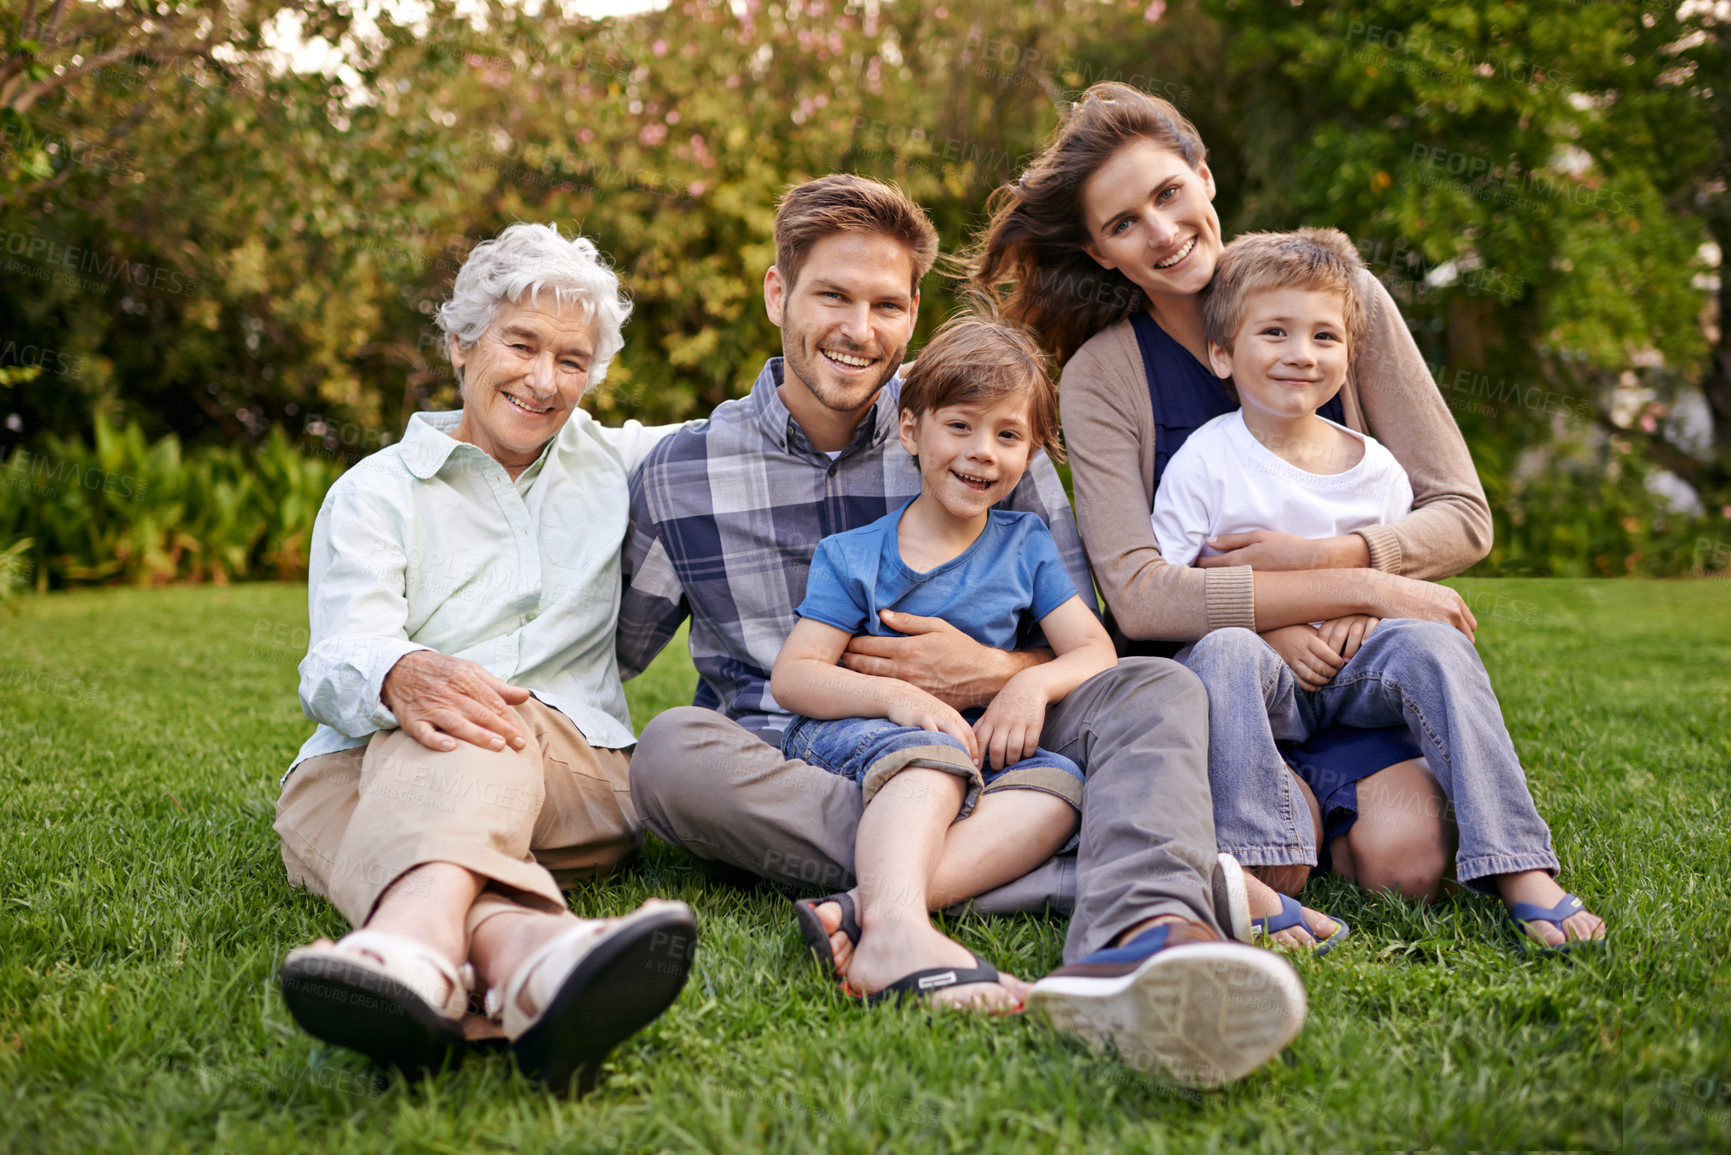 Buy stock photo Nature, portrait and children with parents and grandmother relaxing on grass in outdoor park or garden. Smile, family and boy kids on lawn with mom, dad and grandma for bonding in field together.